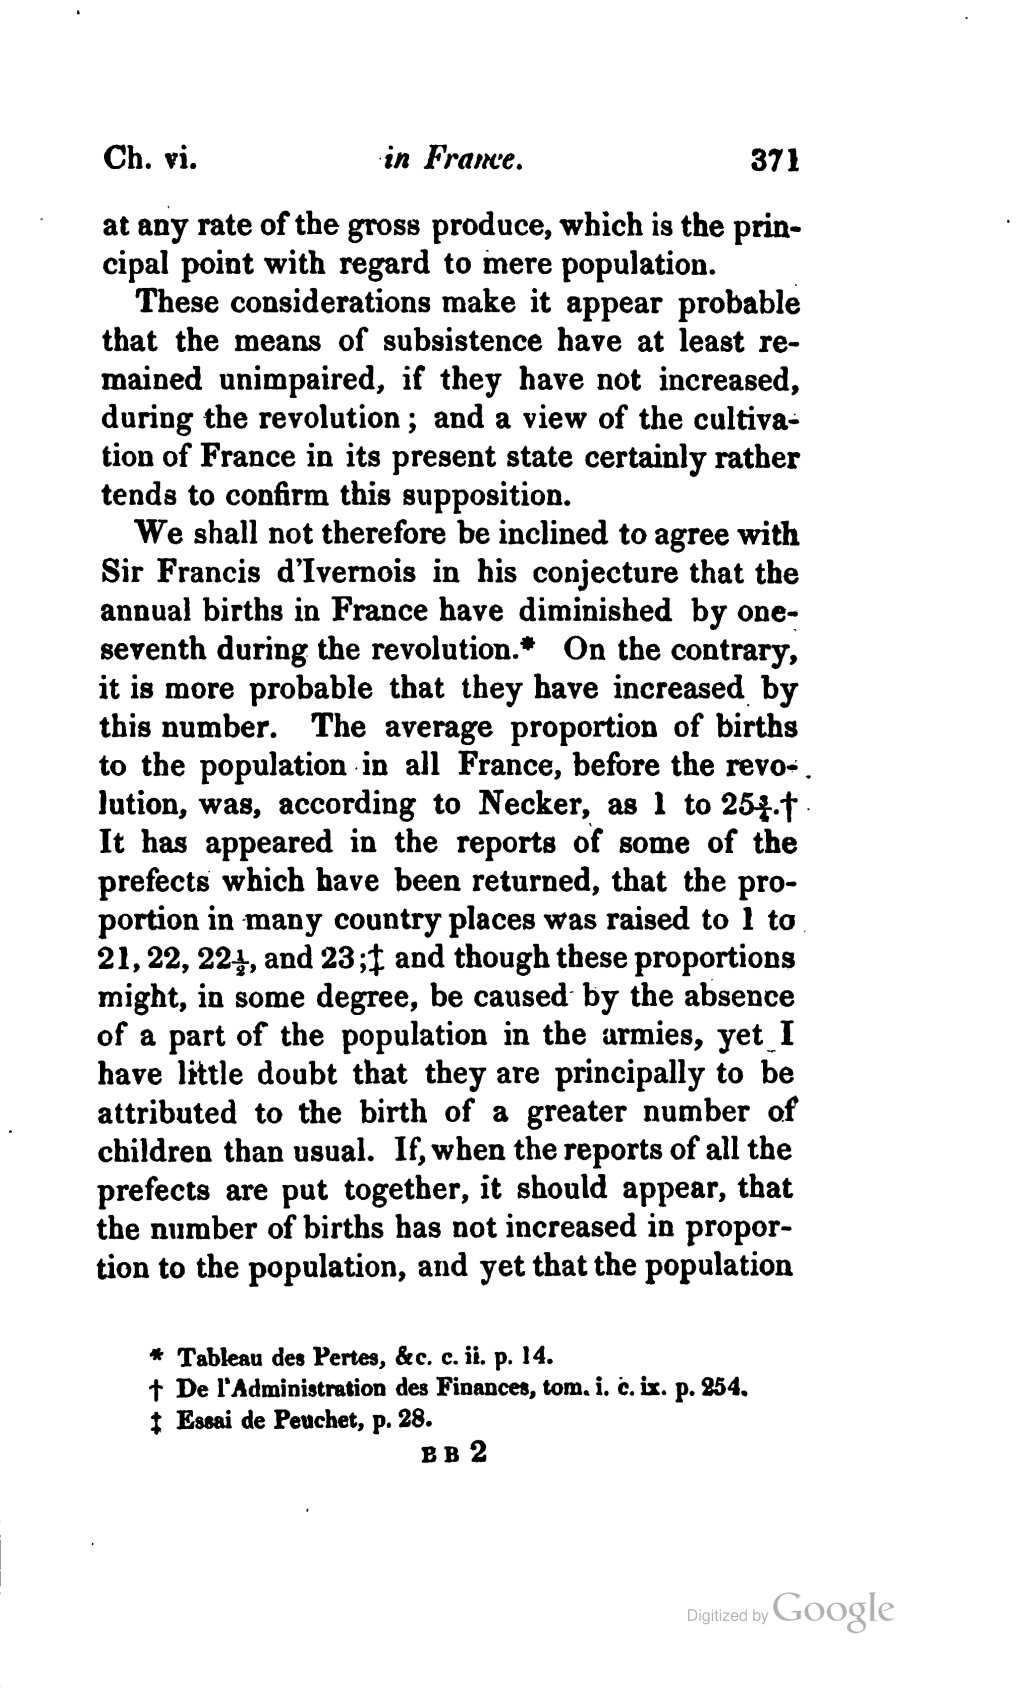 Malthus, Thomas. . An essay on the principle of population; or